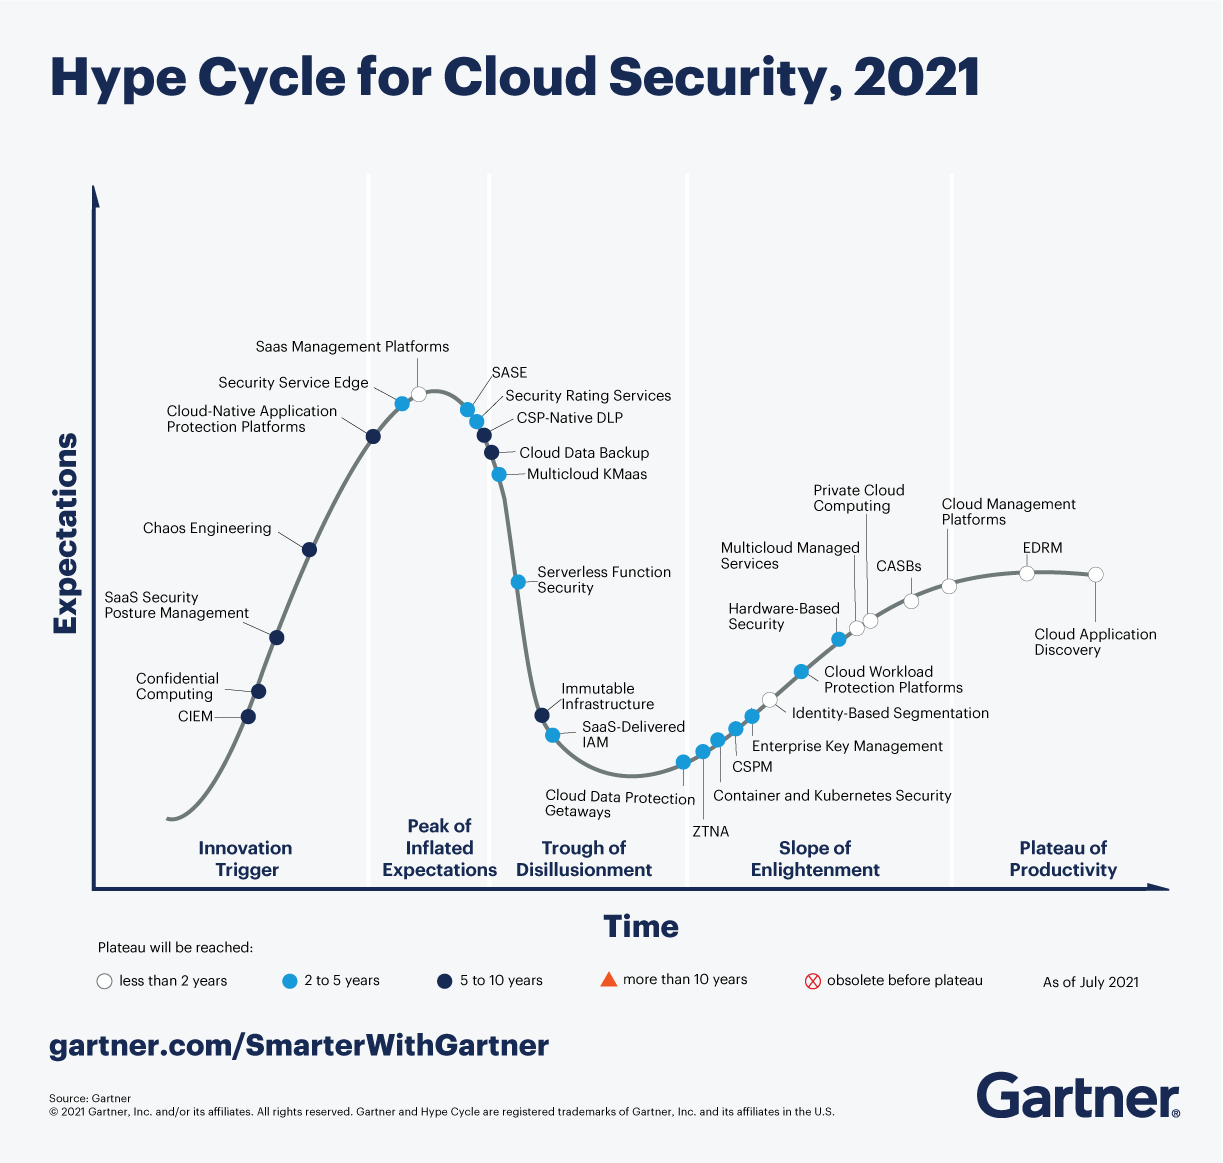 Hype Cycle for Cloud Security, 2021